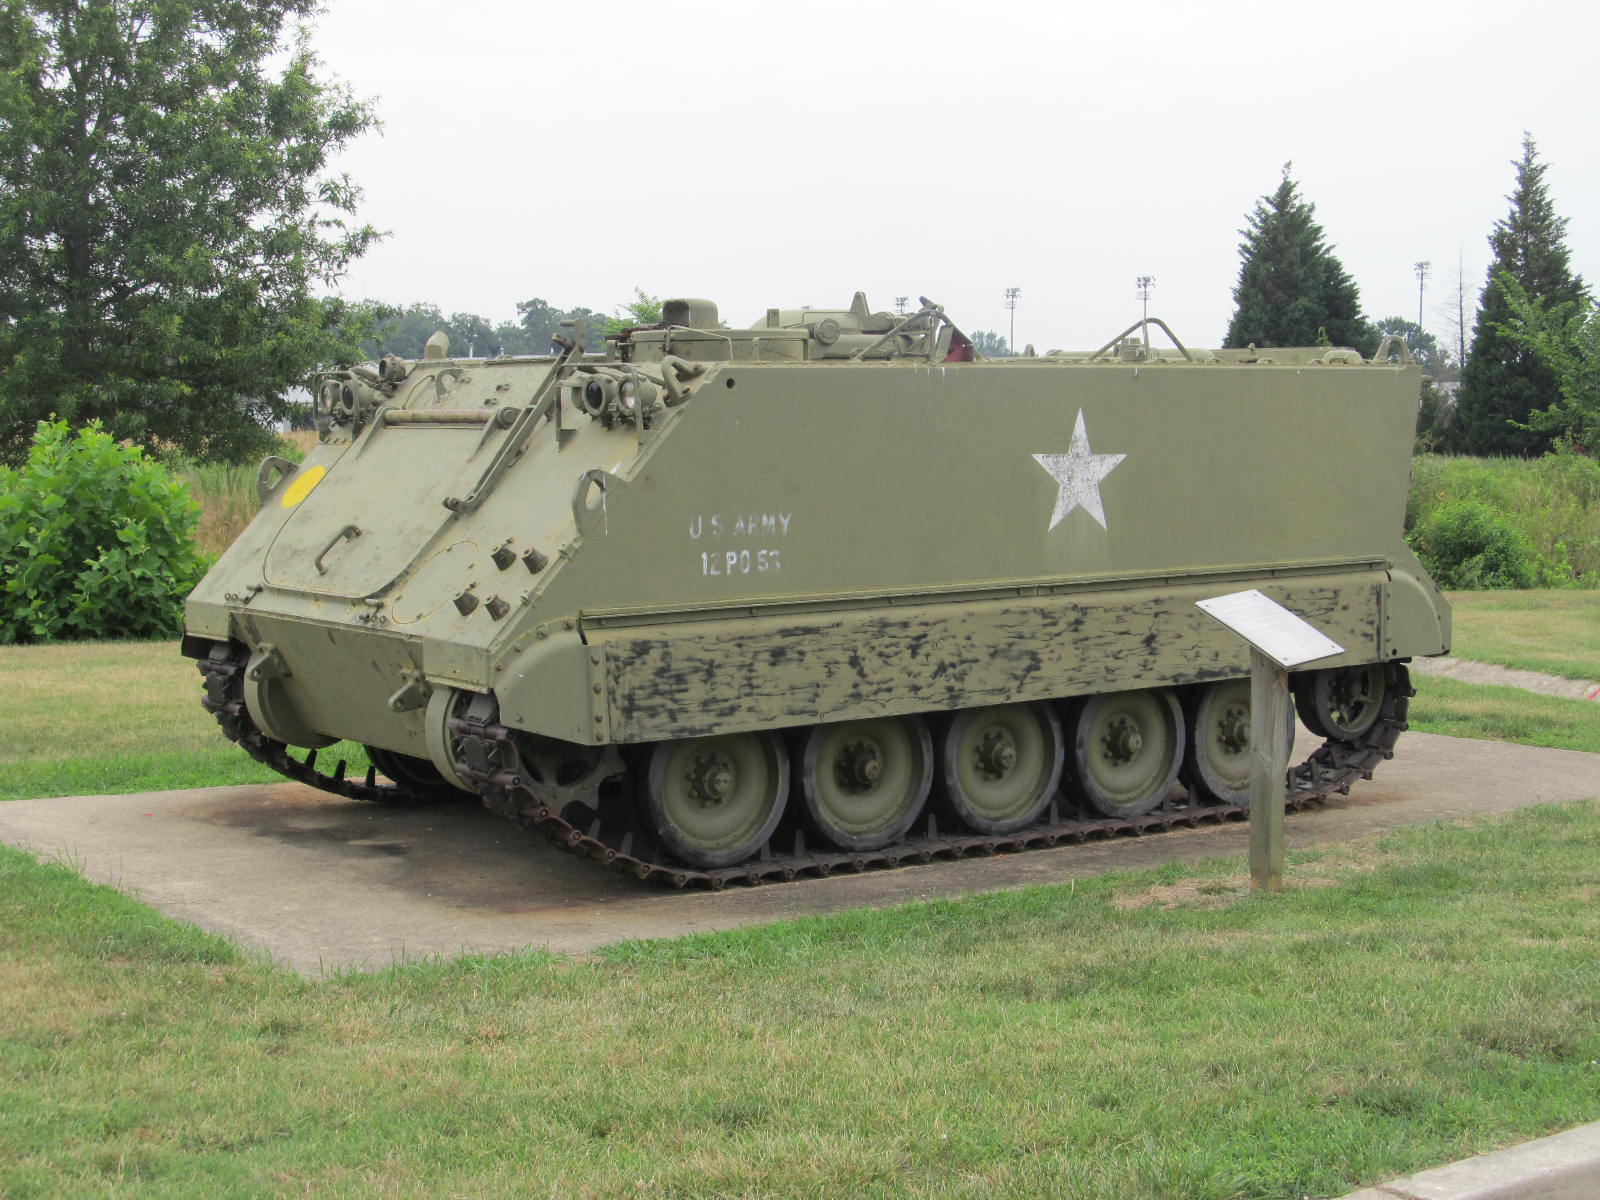 M113 Armored Personnel Carrier #7